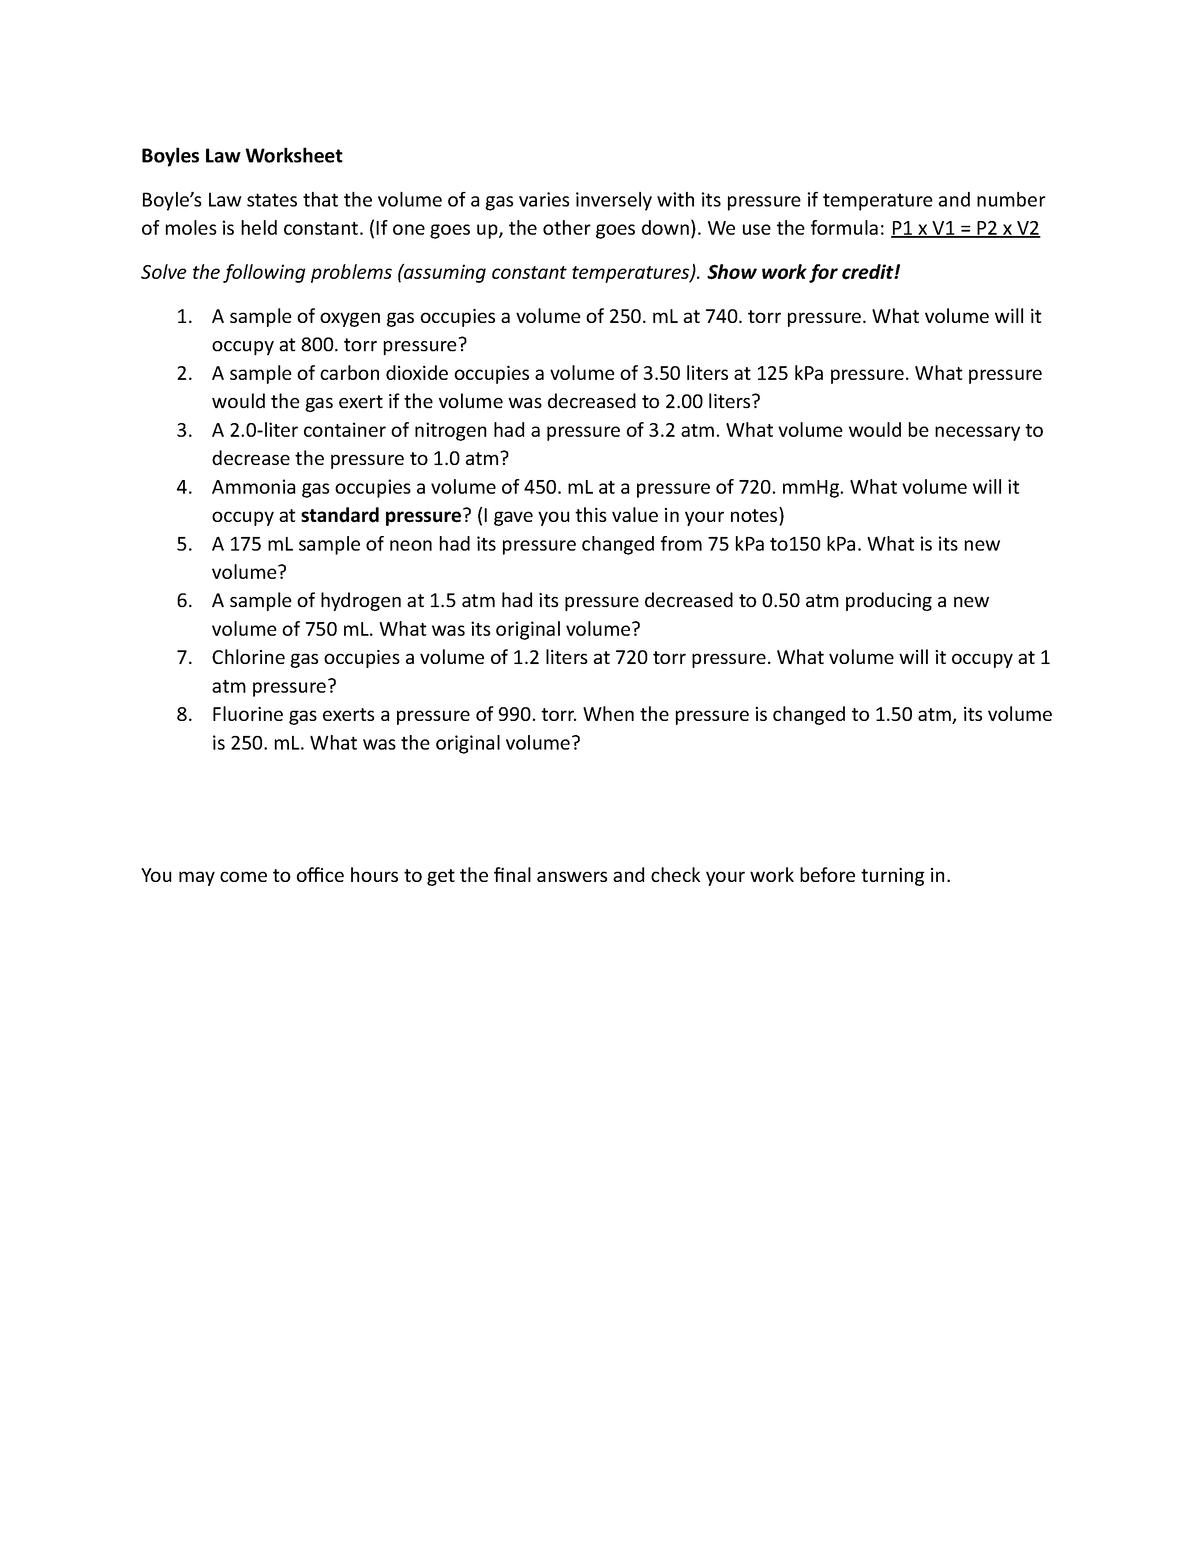 boyles-law-worksheet-from-if-boyles-law-worksheet-boyle-s-law-states